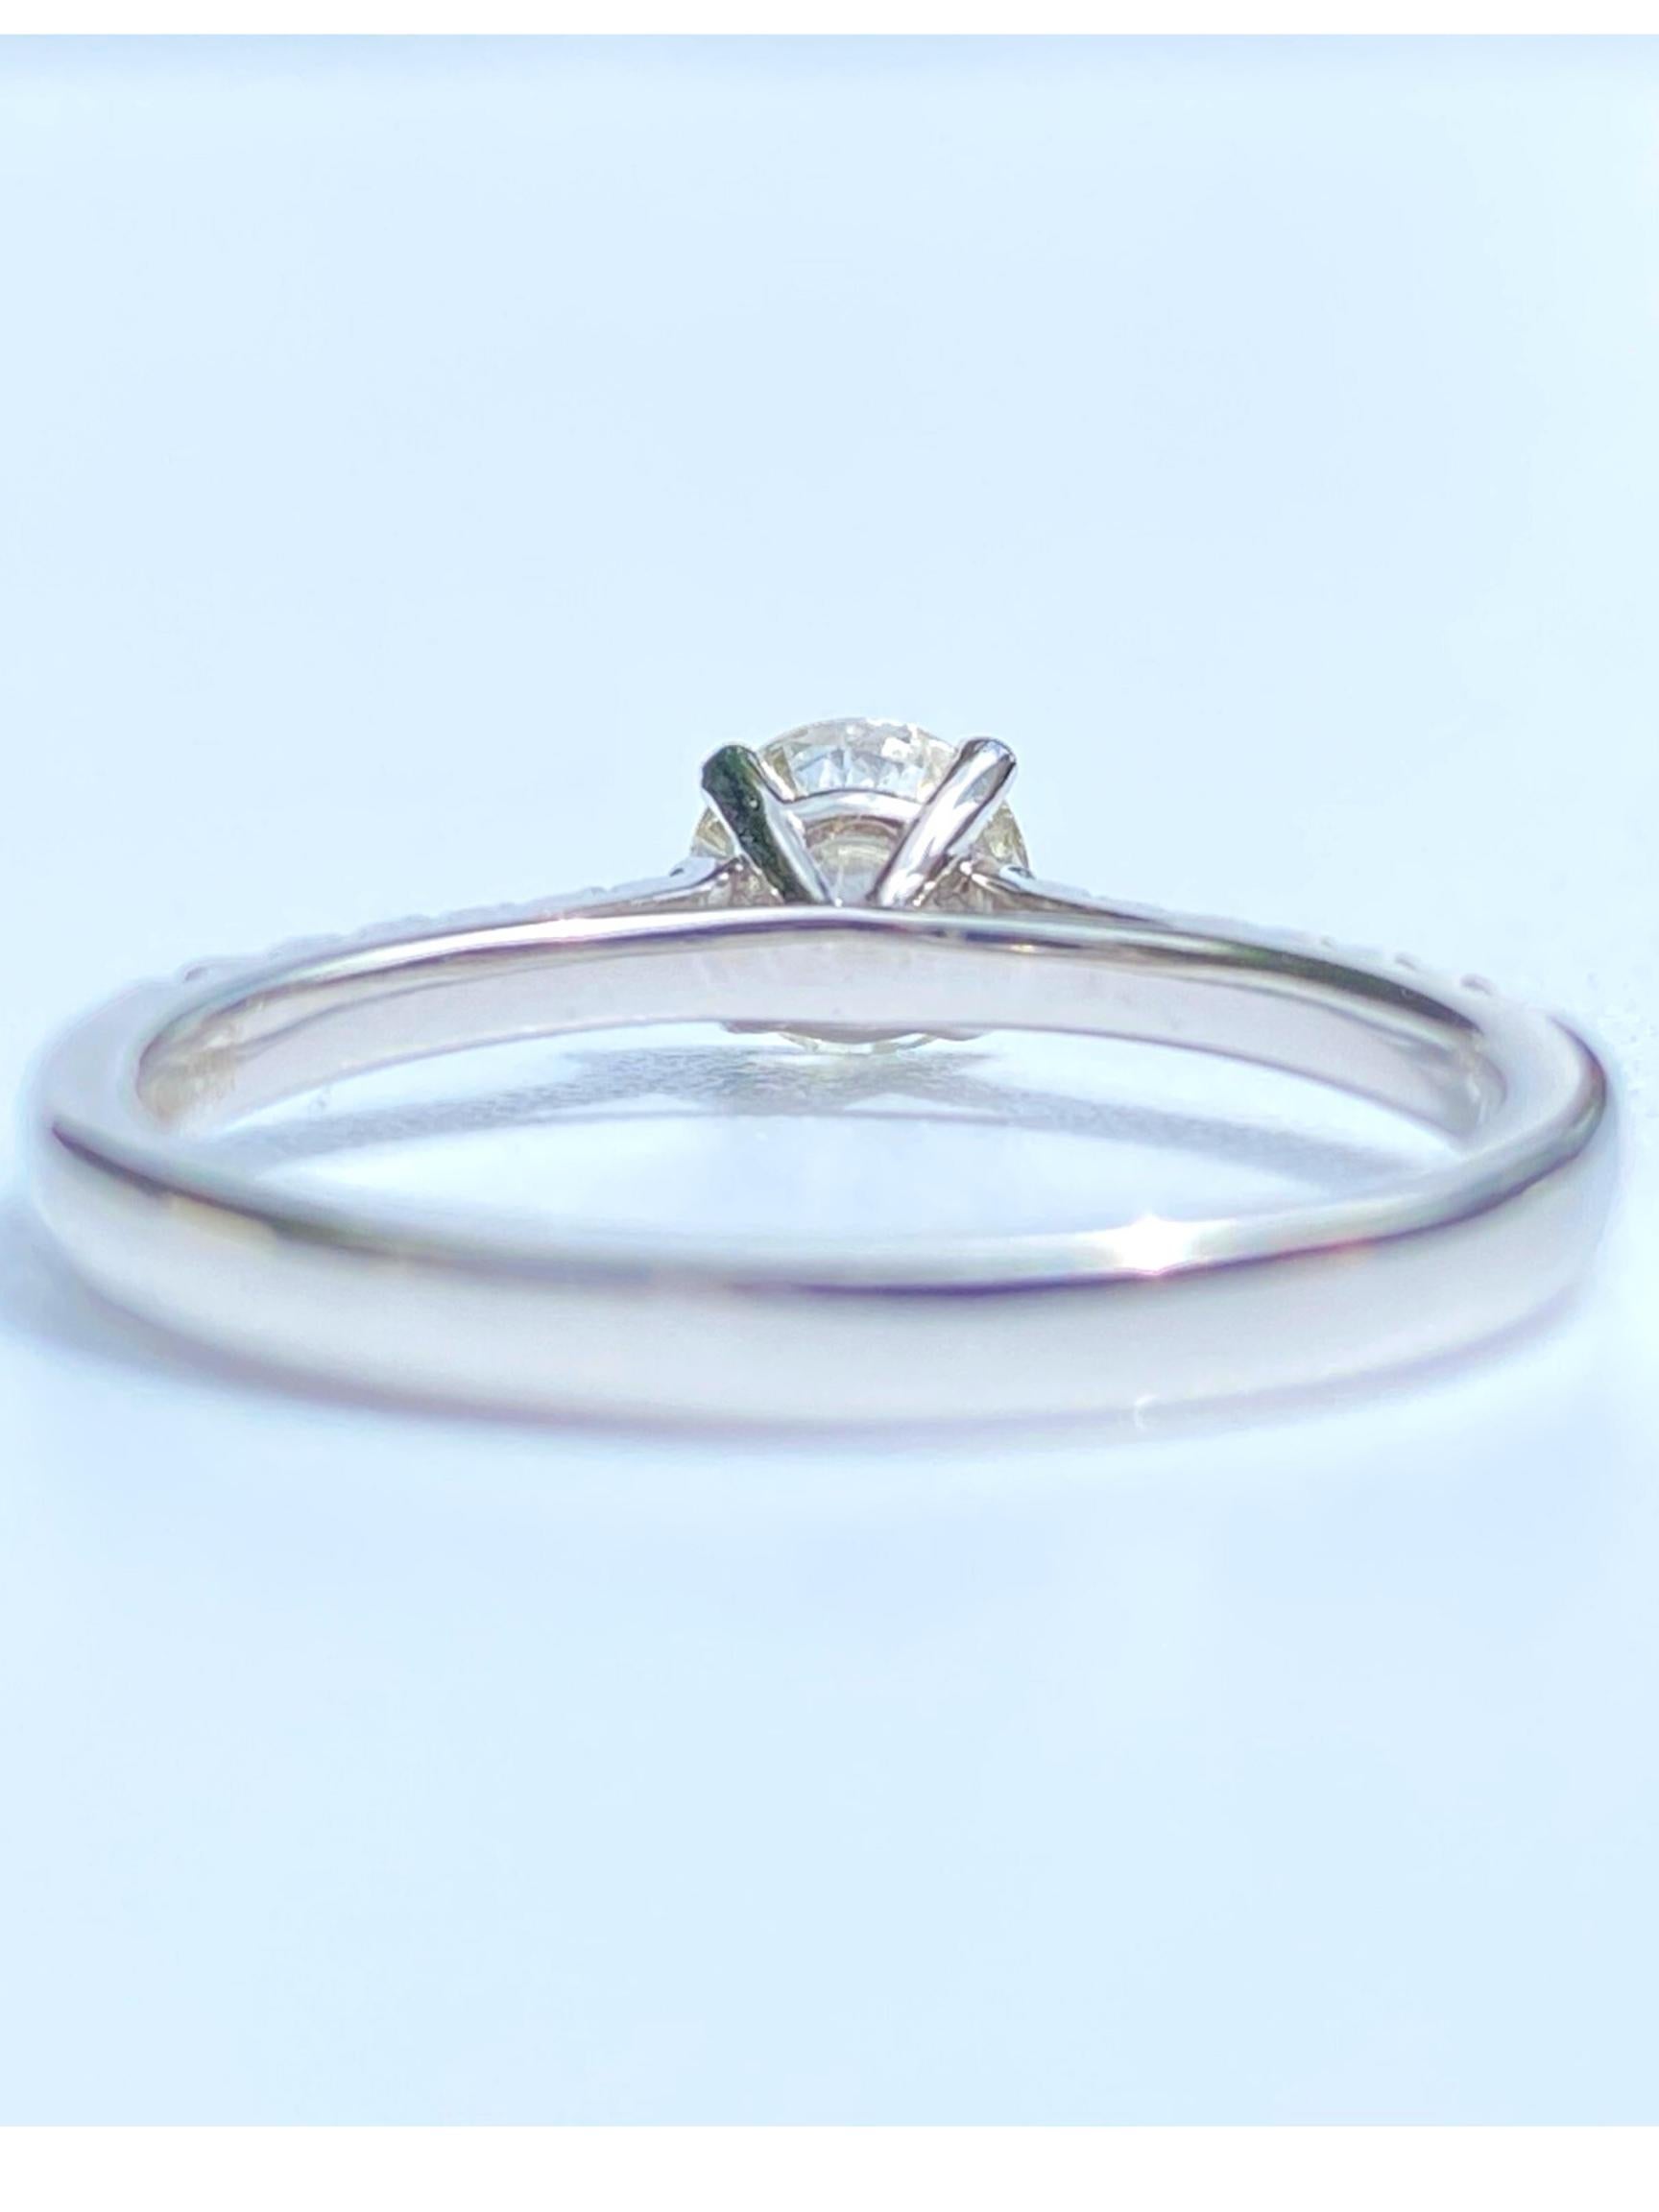 0.55 Carat F-H Color Round-Brilliant Cut Engagement Ring in 18k White Gold In New Condition For Sale In Miami, FL